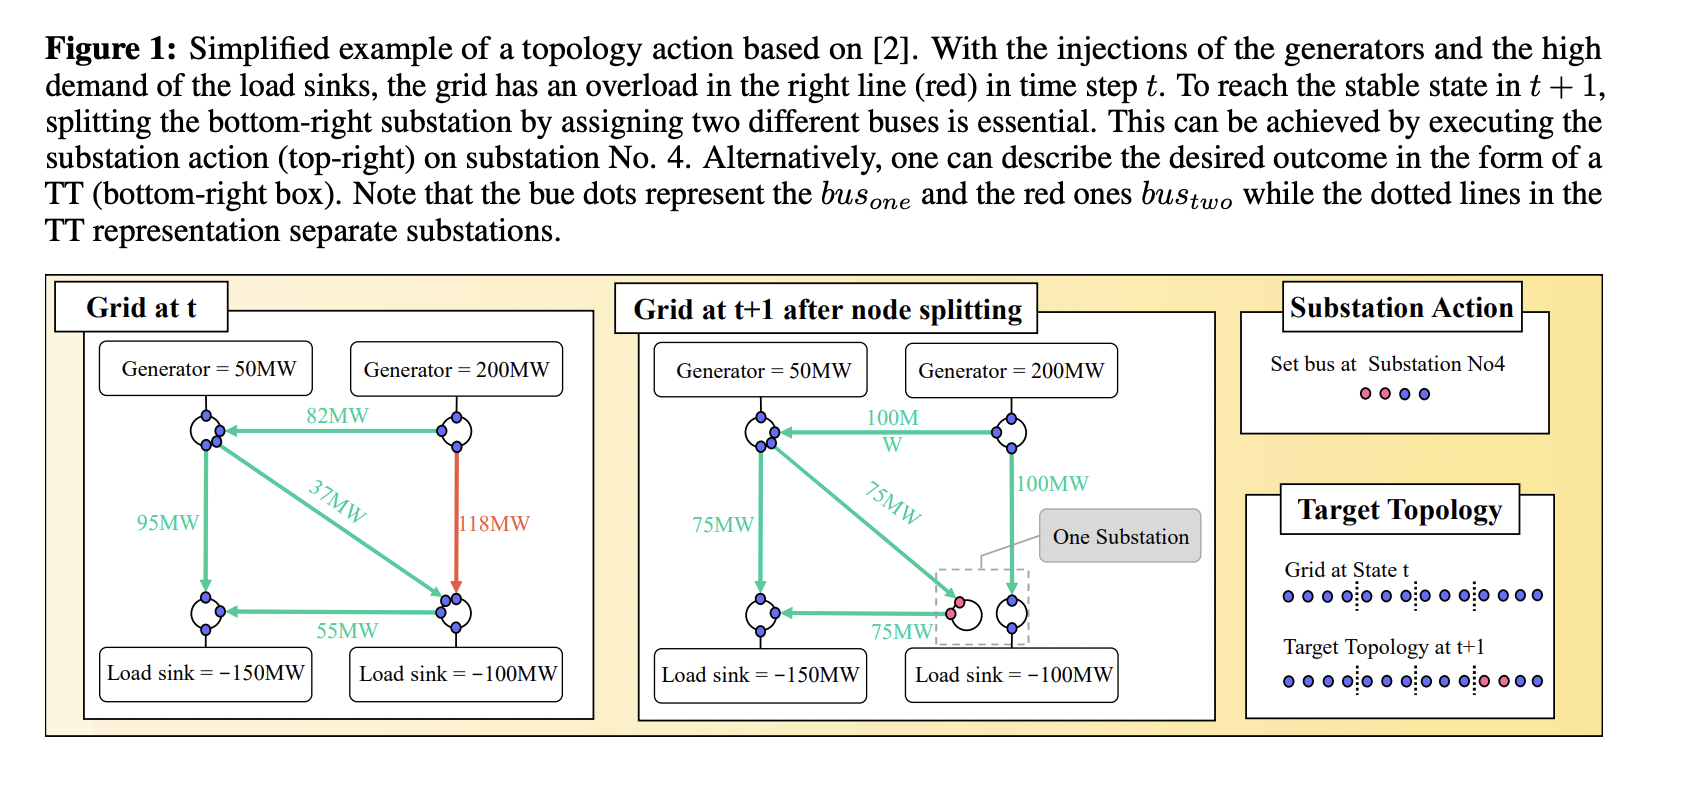  Researchers at Kassel University Introduce a Machine Learning Approach Presenting Specific Target Topologies (Tts) as Actions